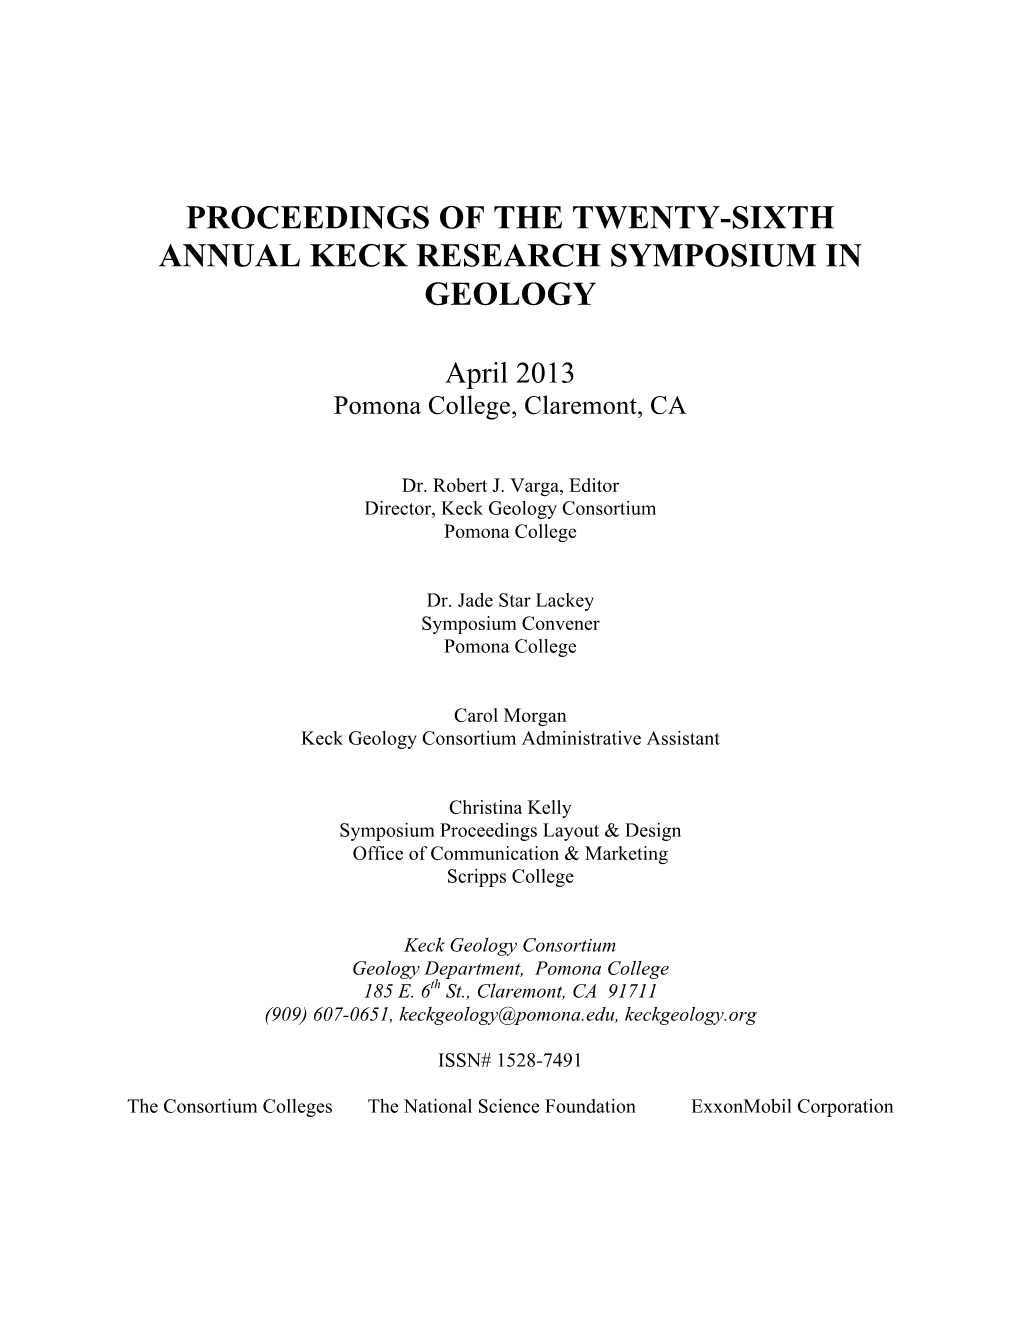 Proceedings of the Twenty-Sixth Annual Keck Research Symposium in Geology